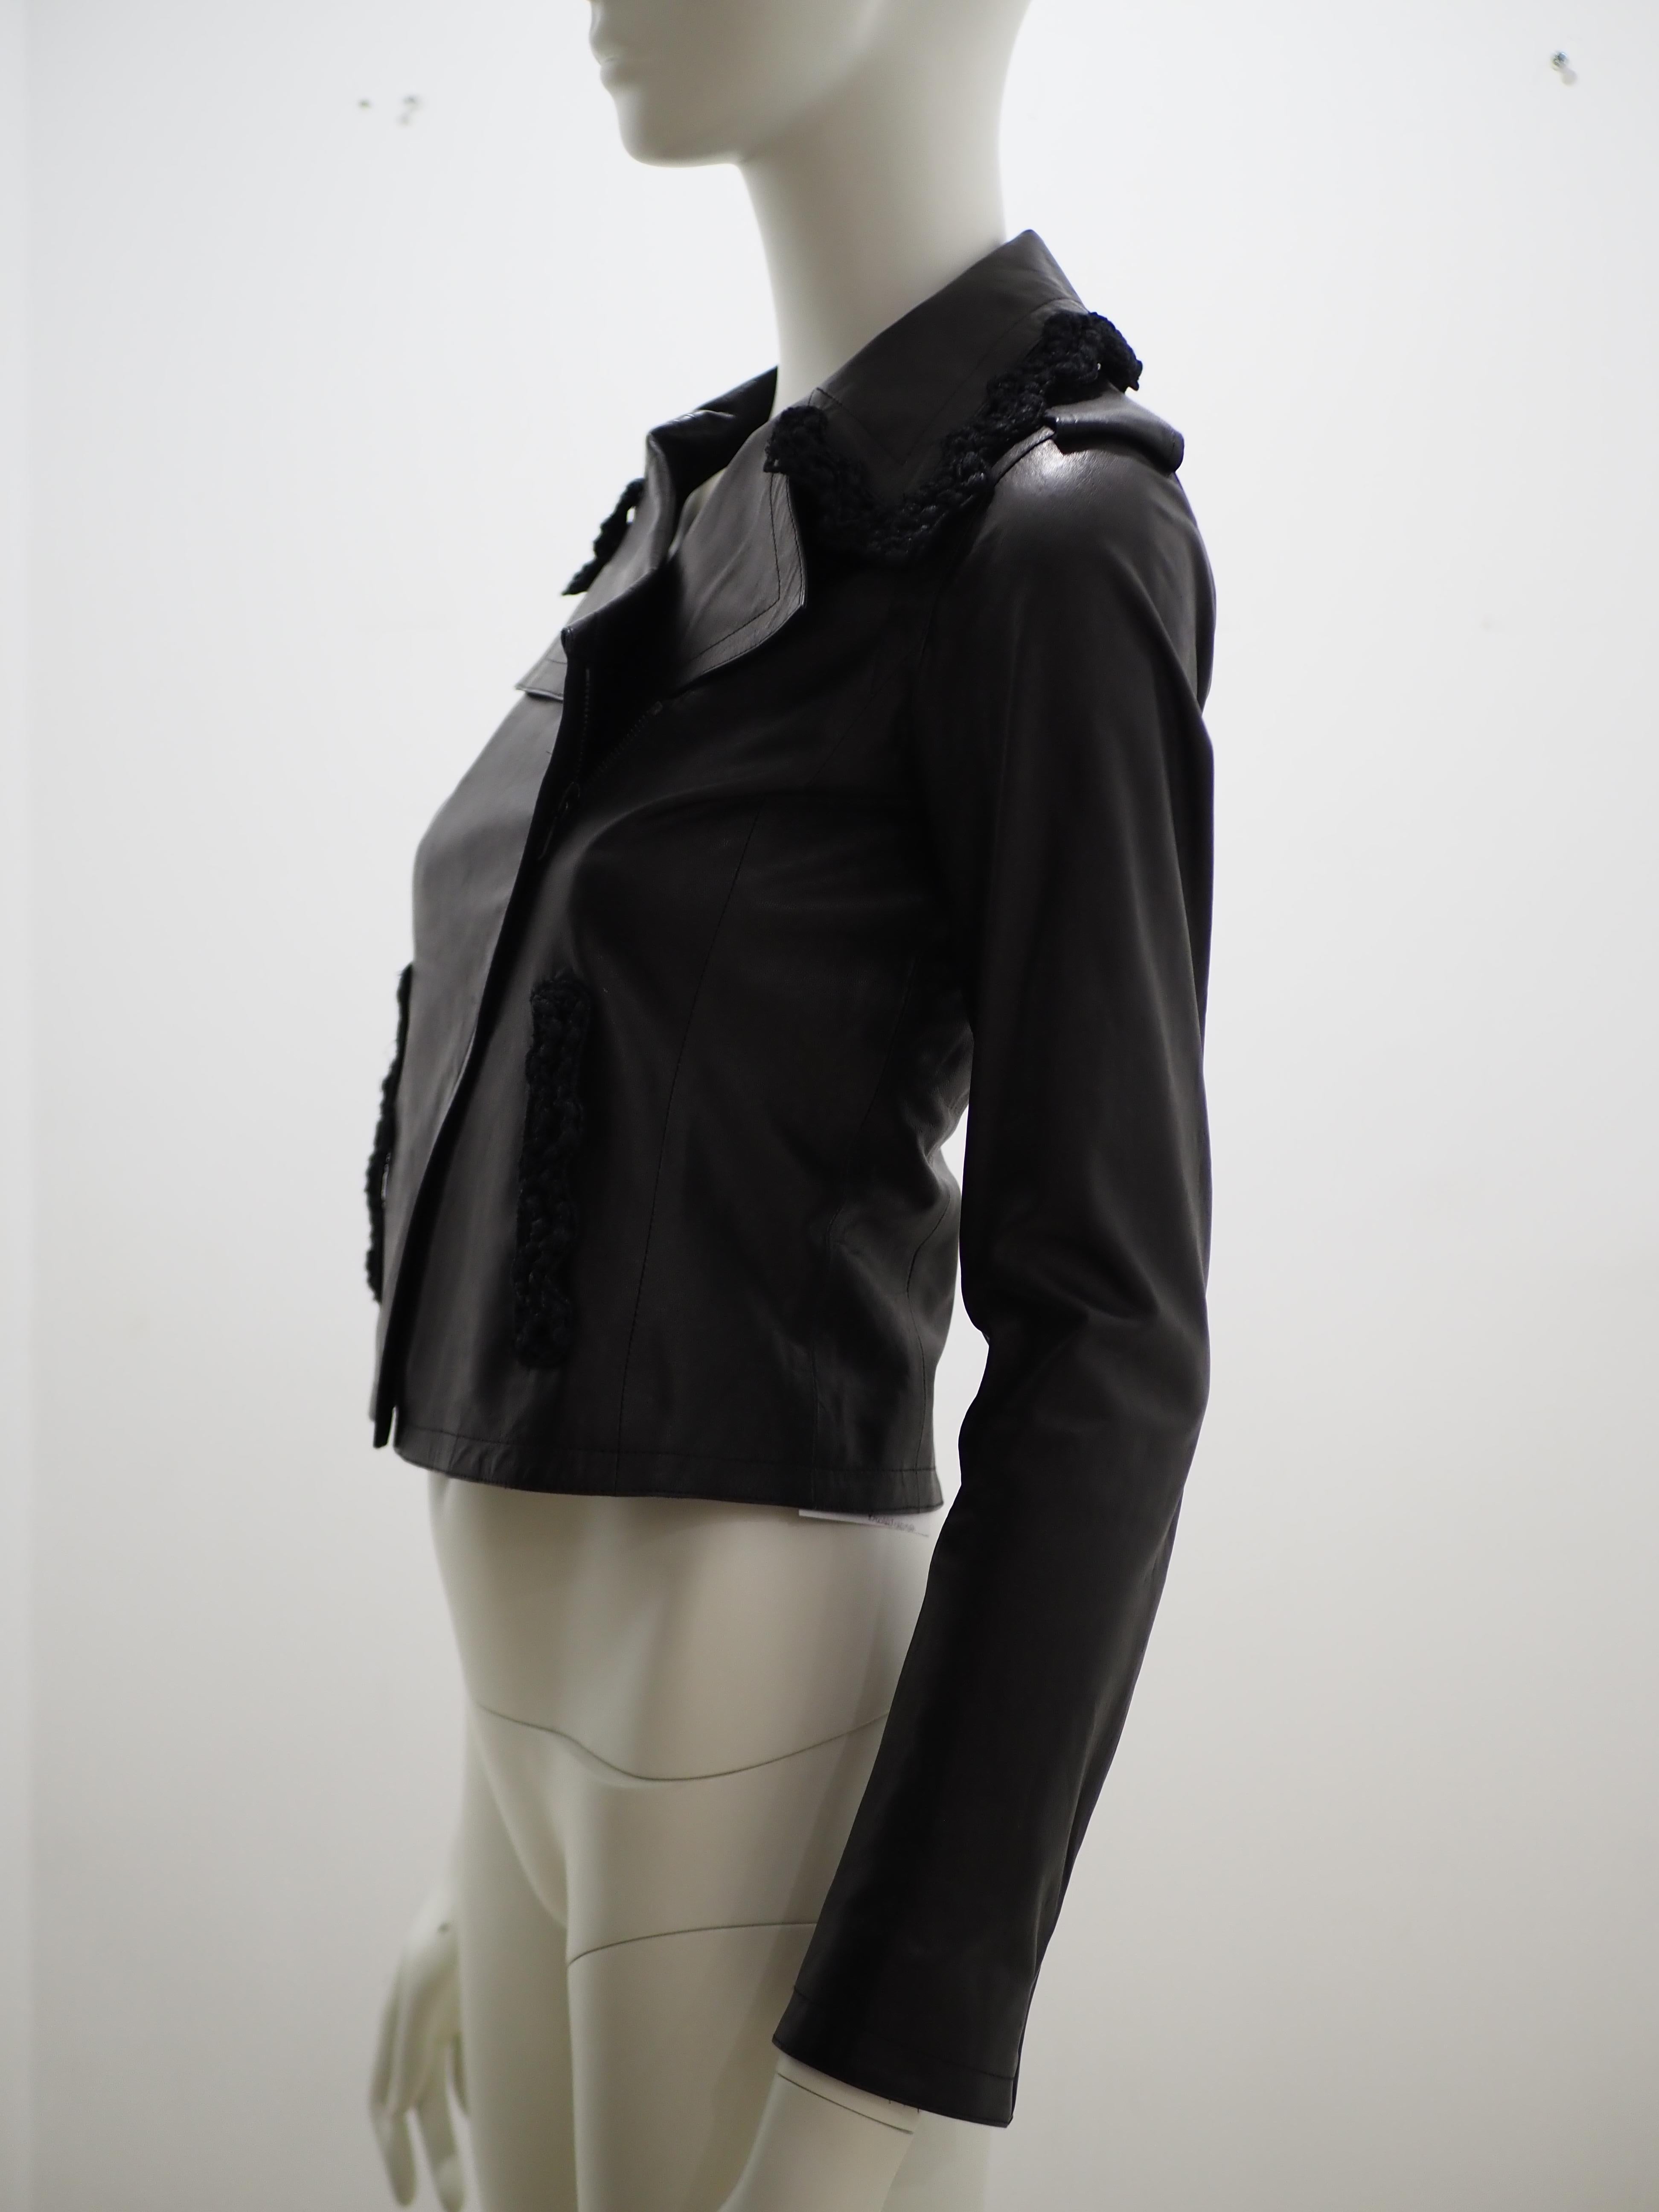 Women's Chanel black leather jacket For Sale